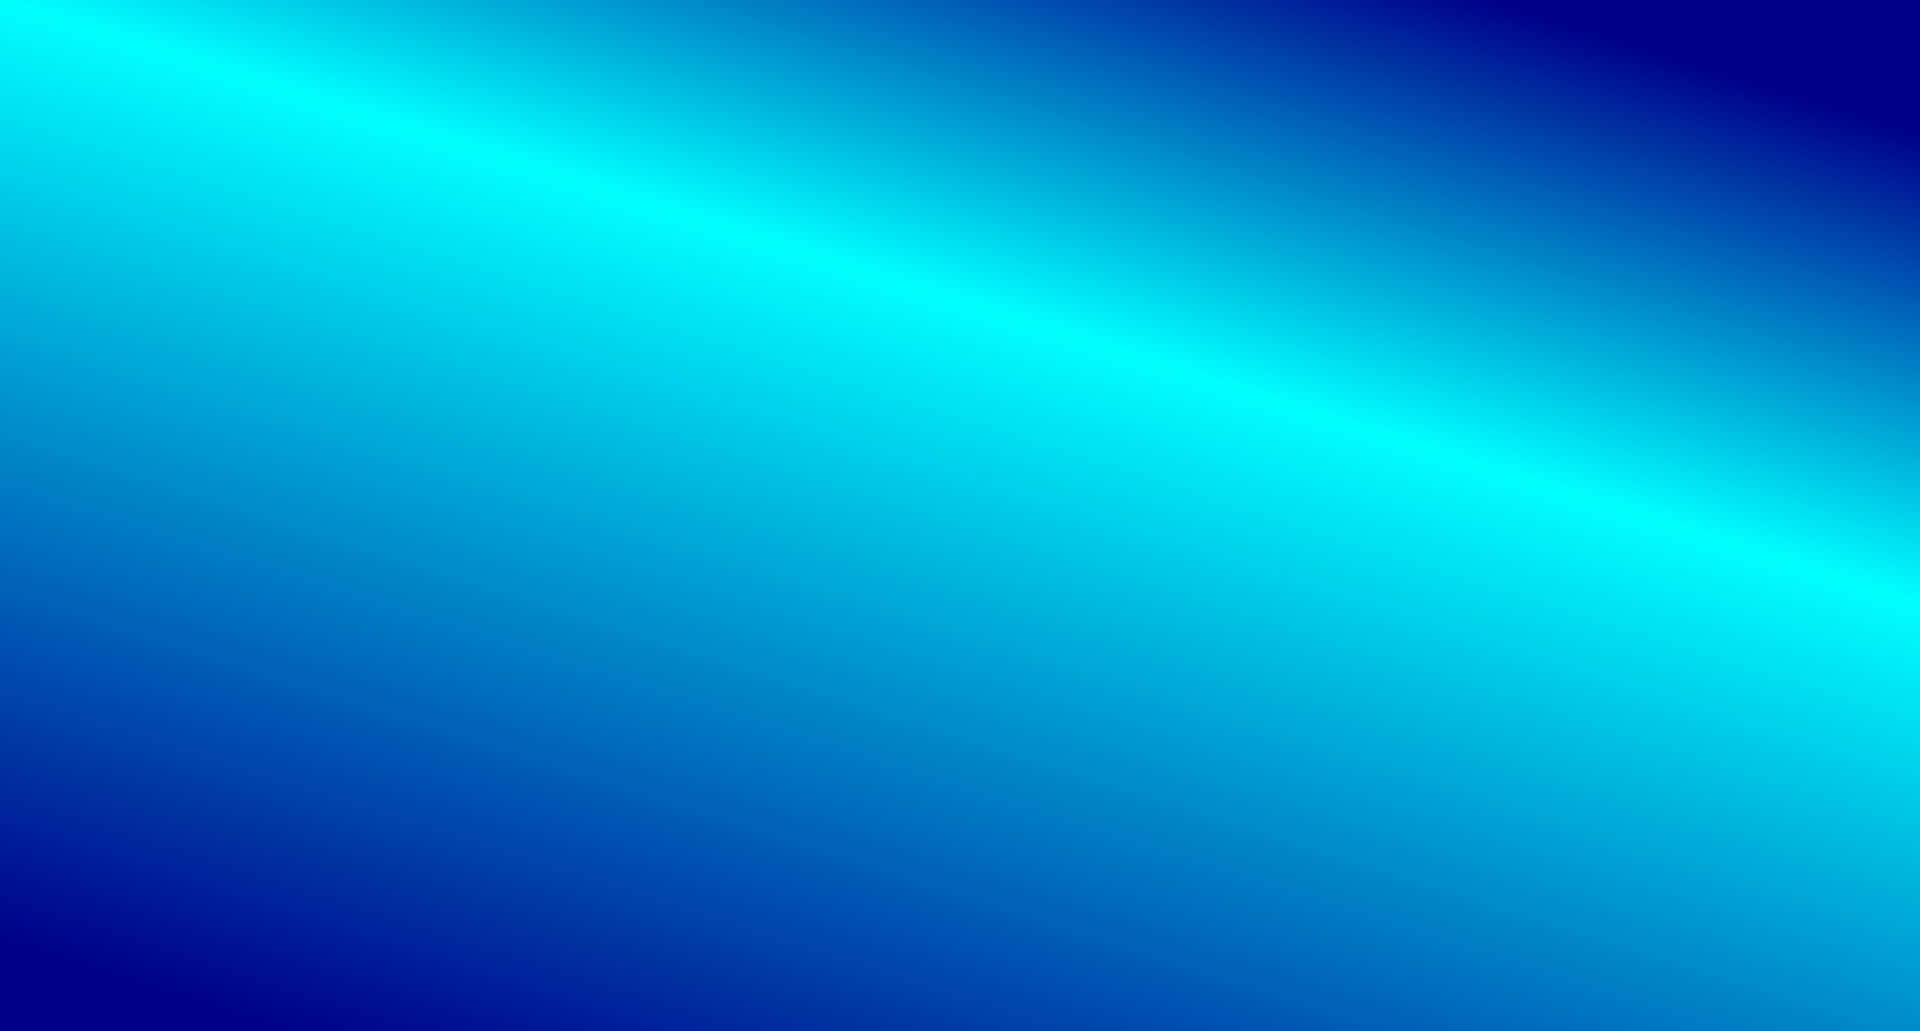 Blue Gradient with White Middle